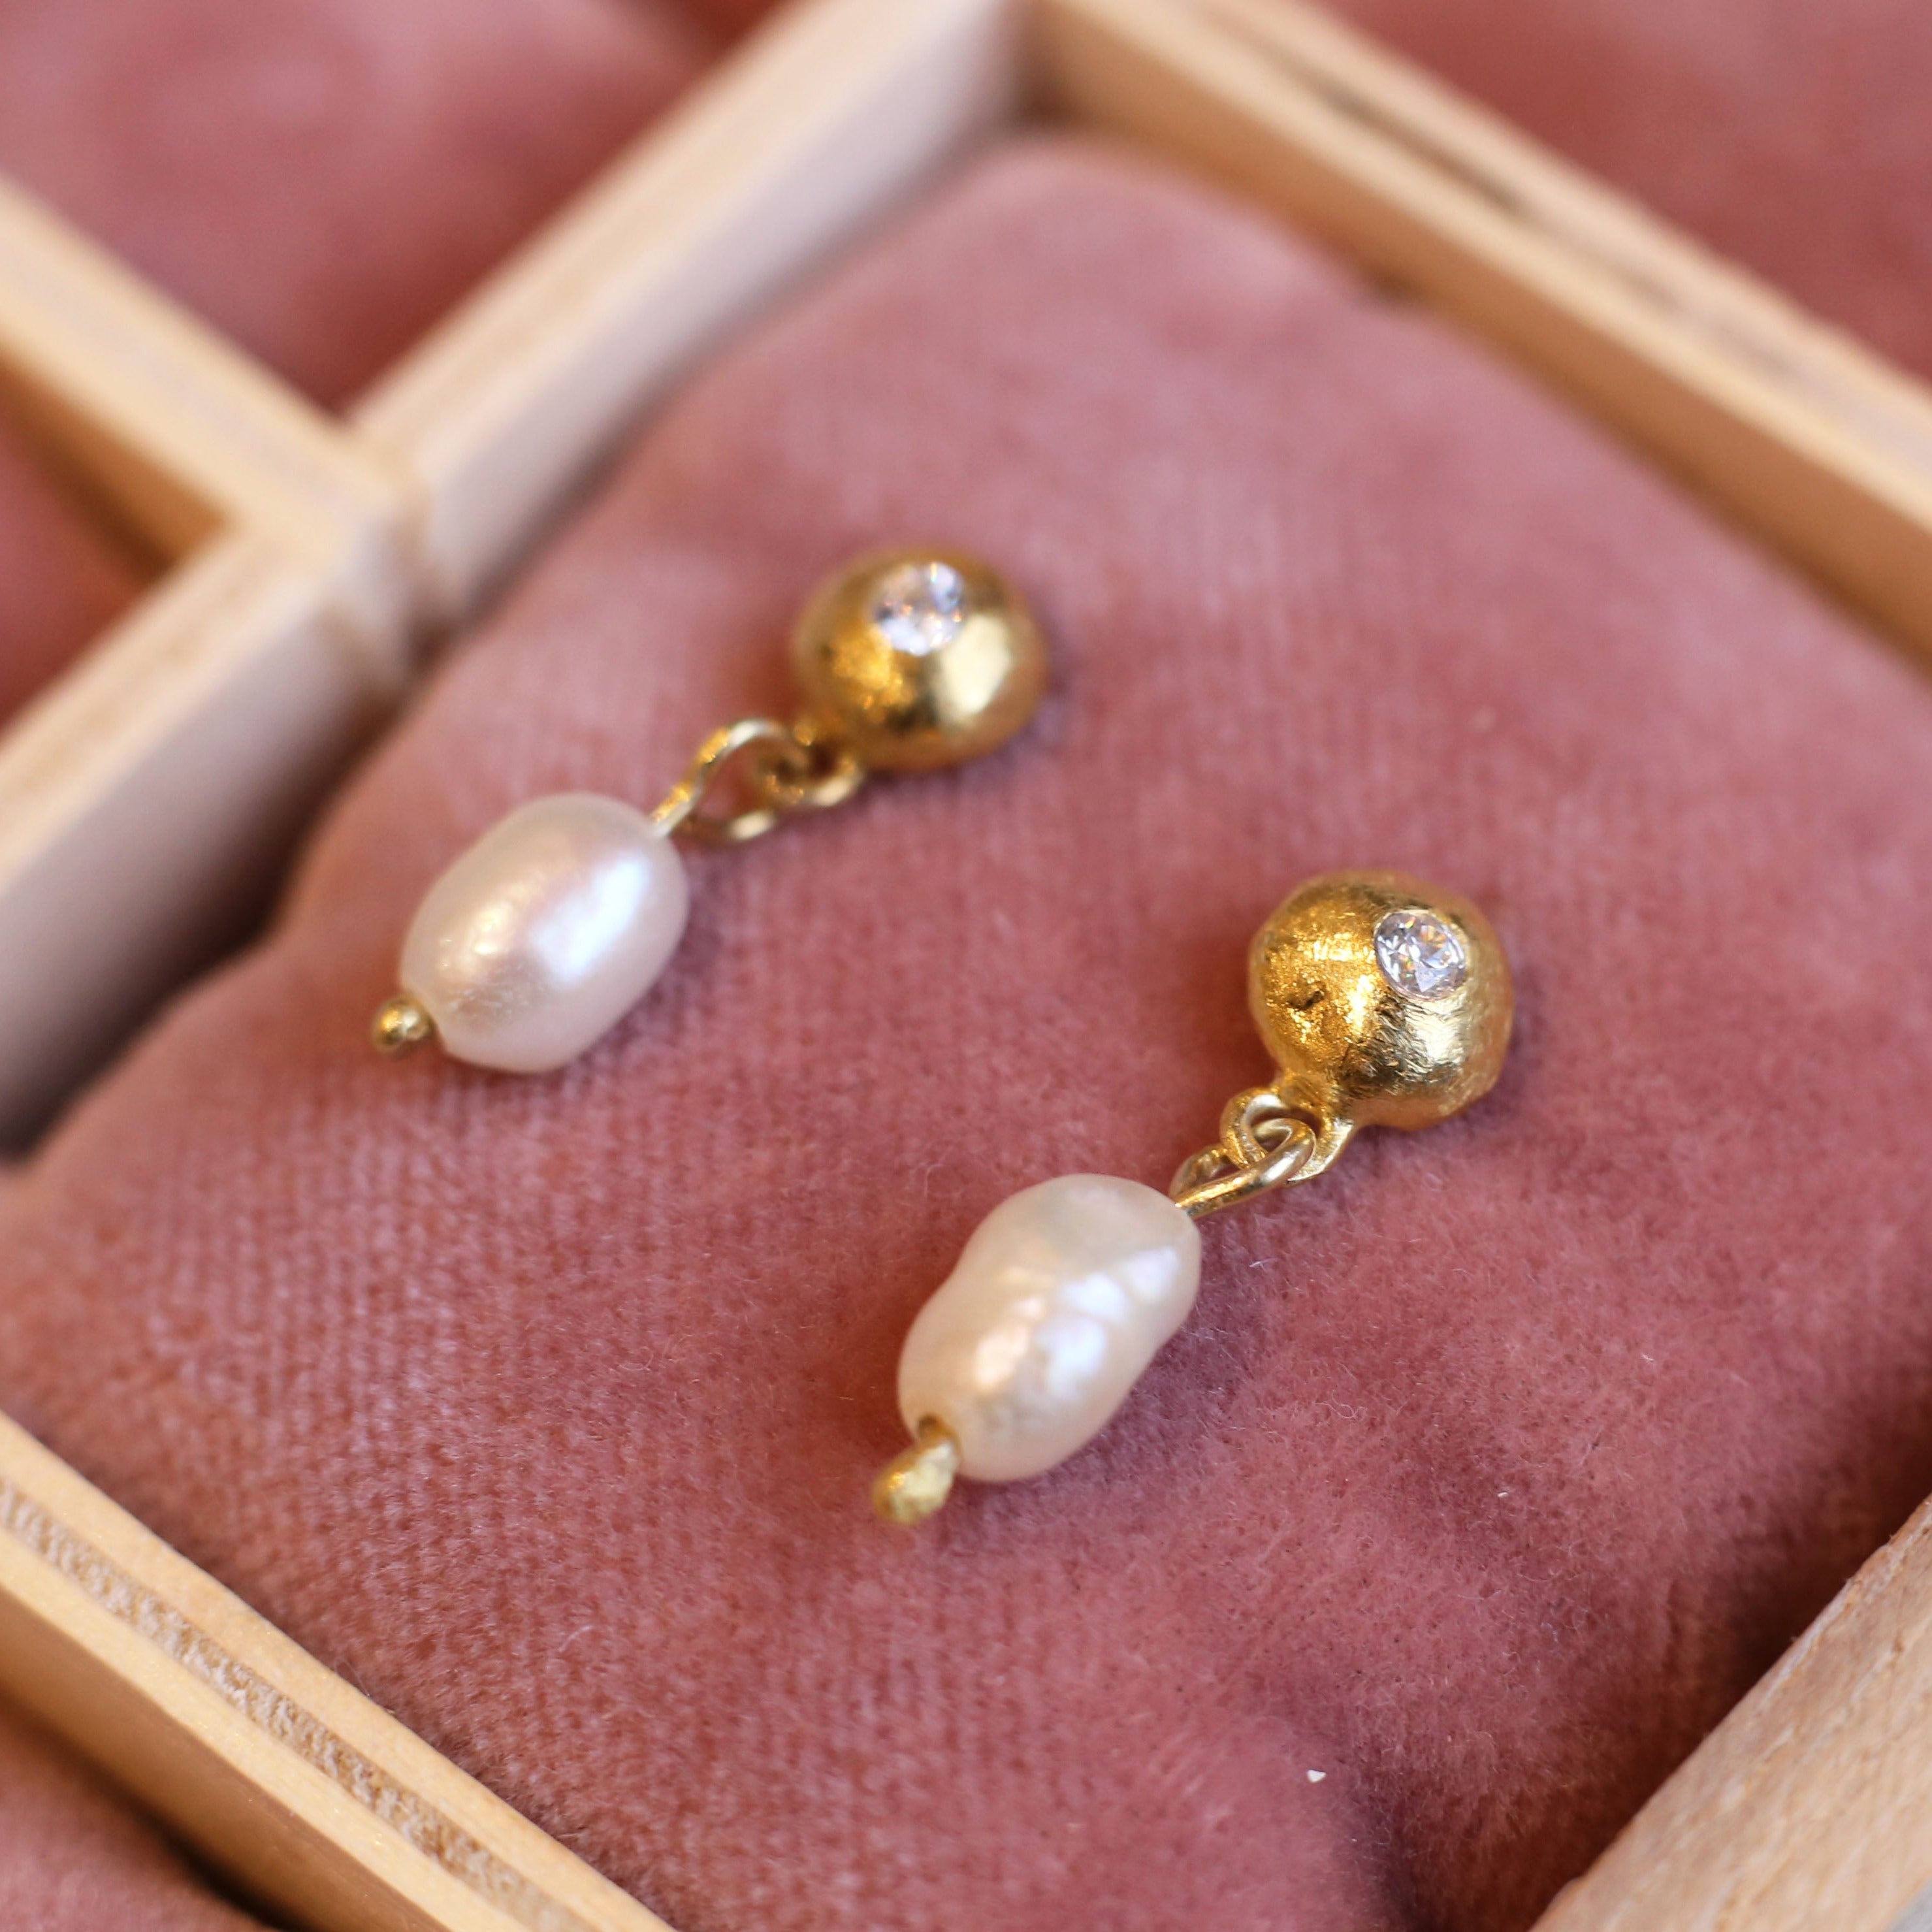 gold plated sterling silver pearl drop earrings, set with cz stones and fresh water pearl drops